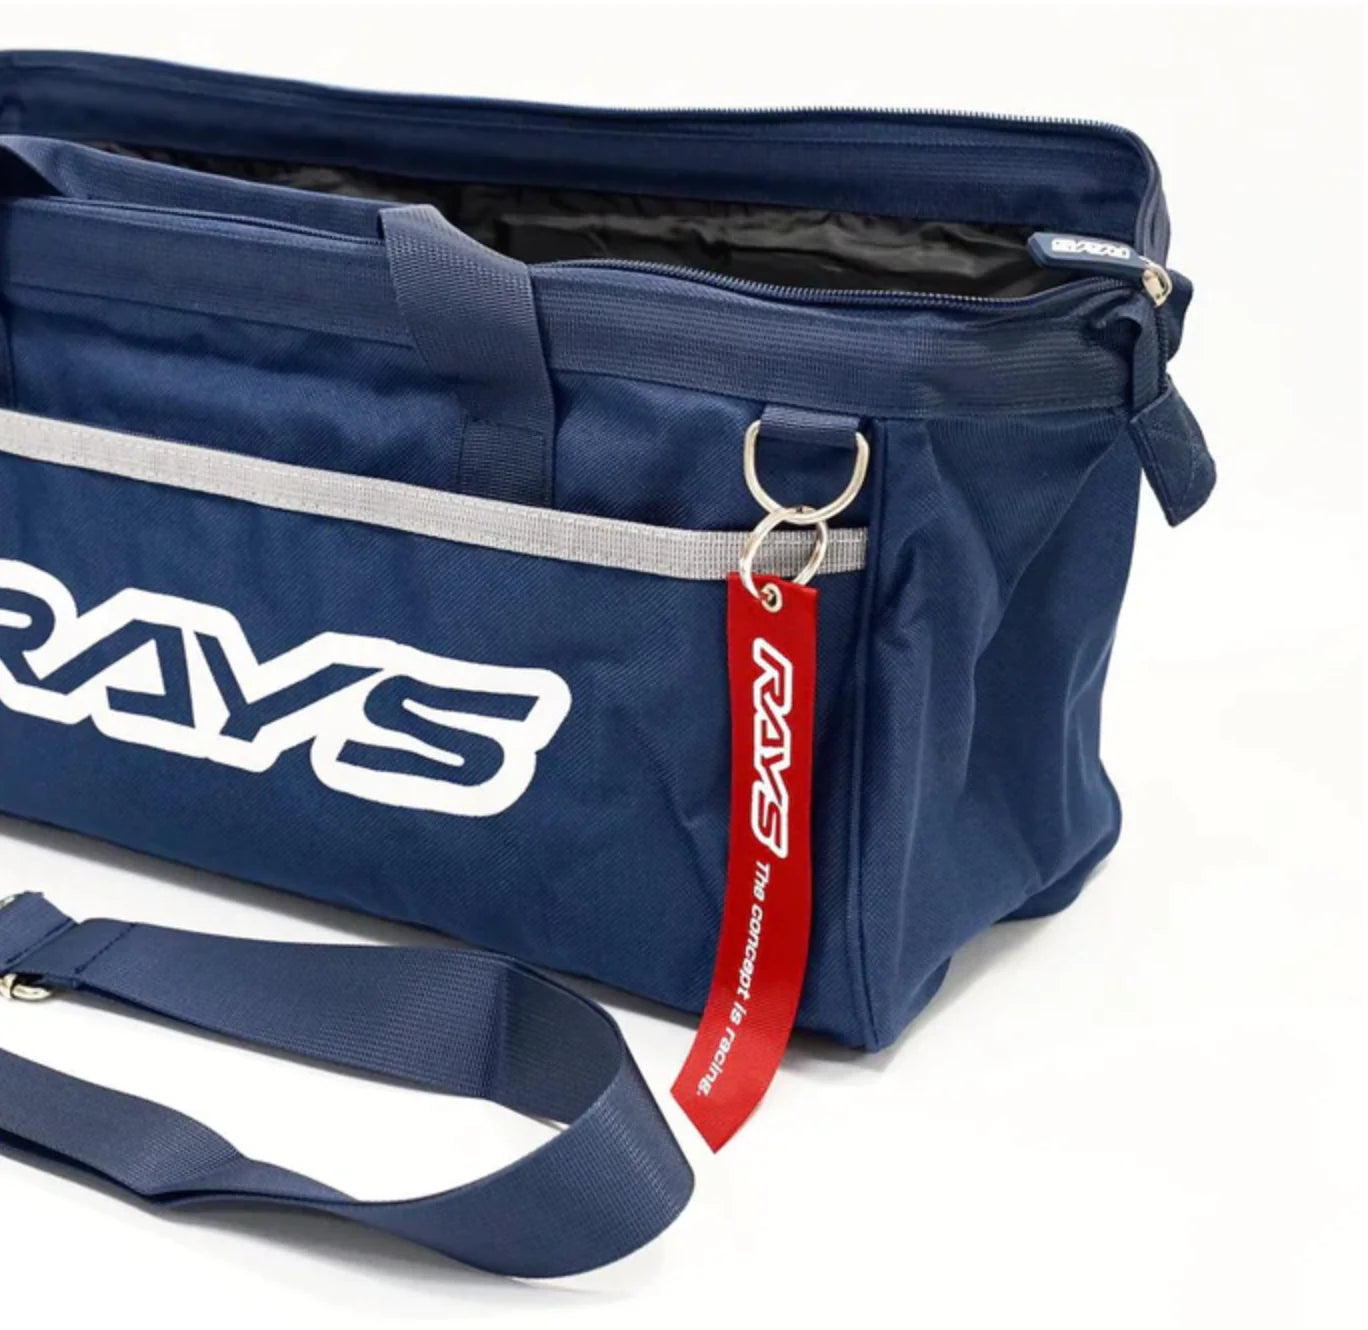 Rays Engineering Official Tool Bag